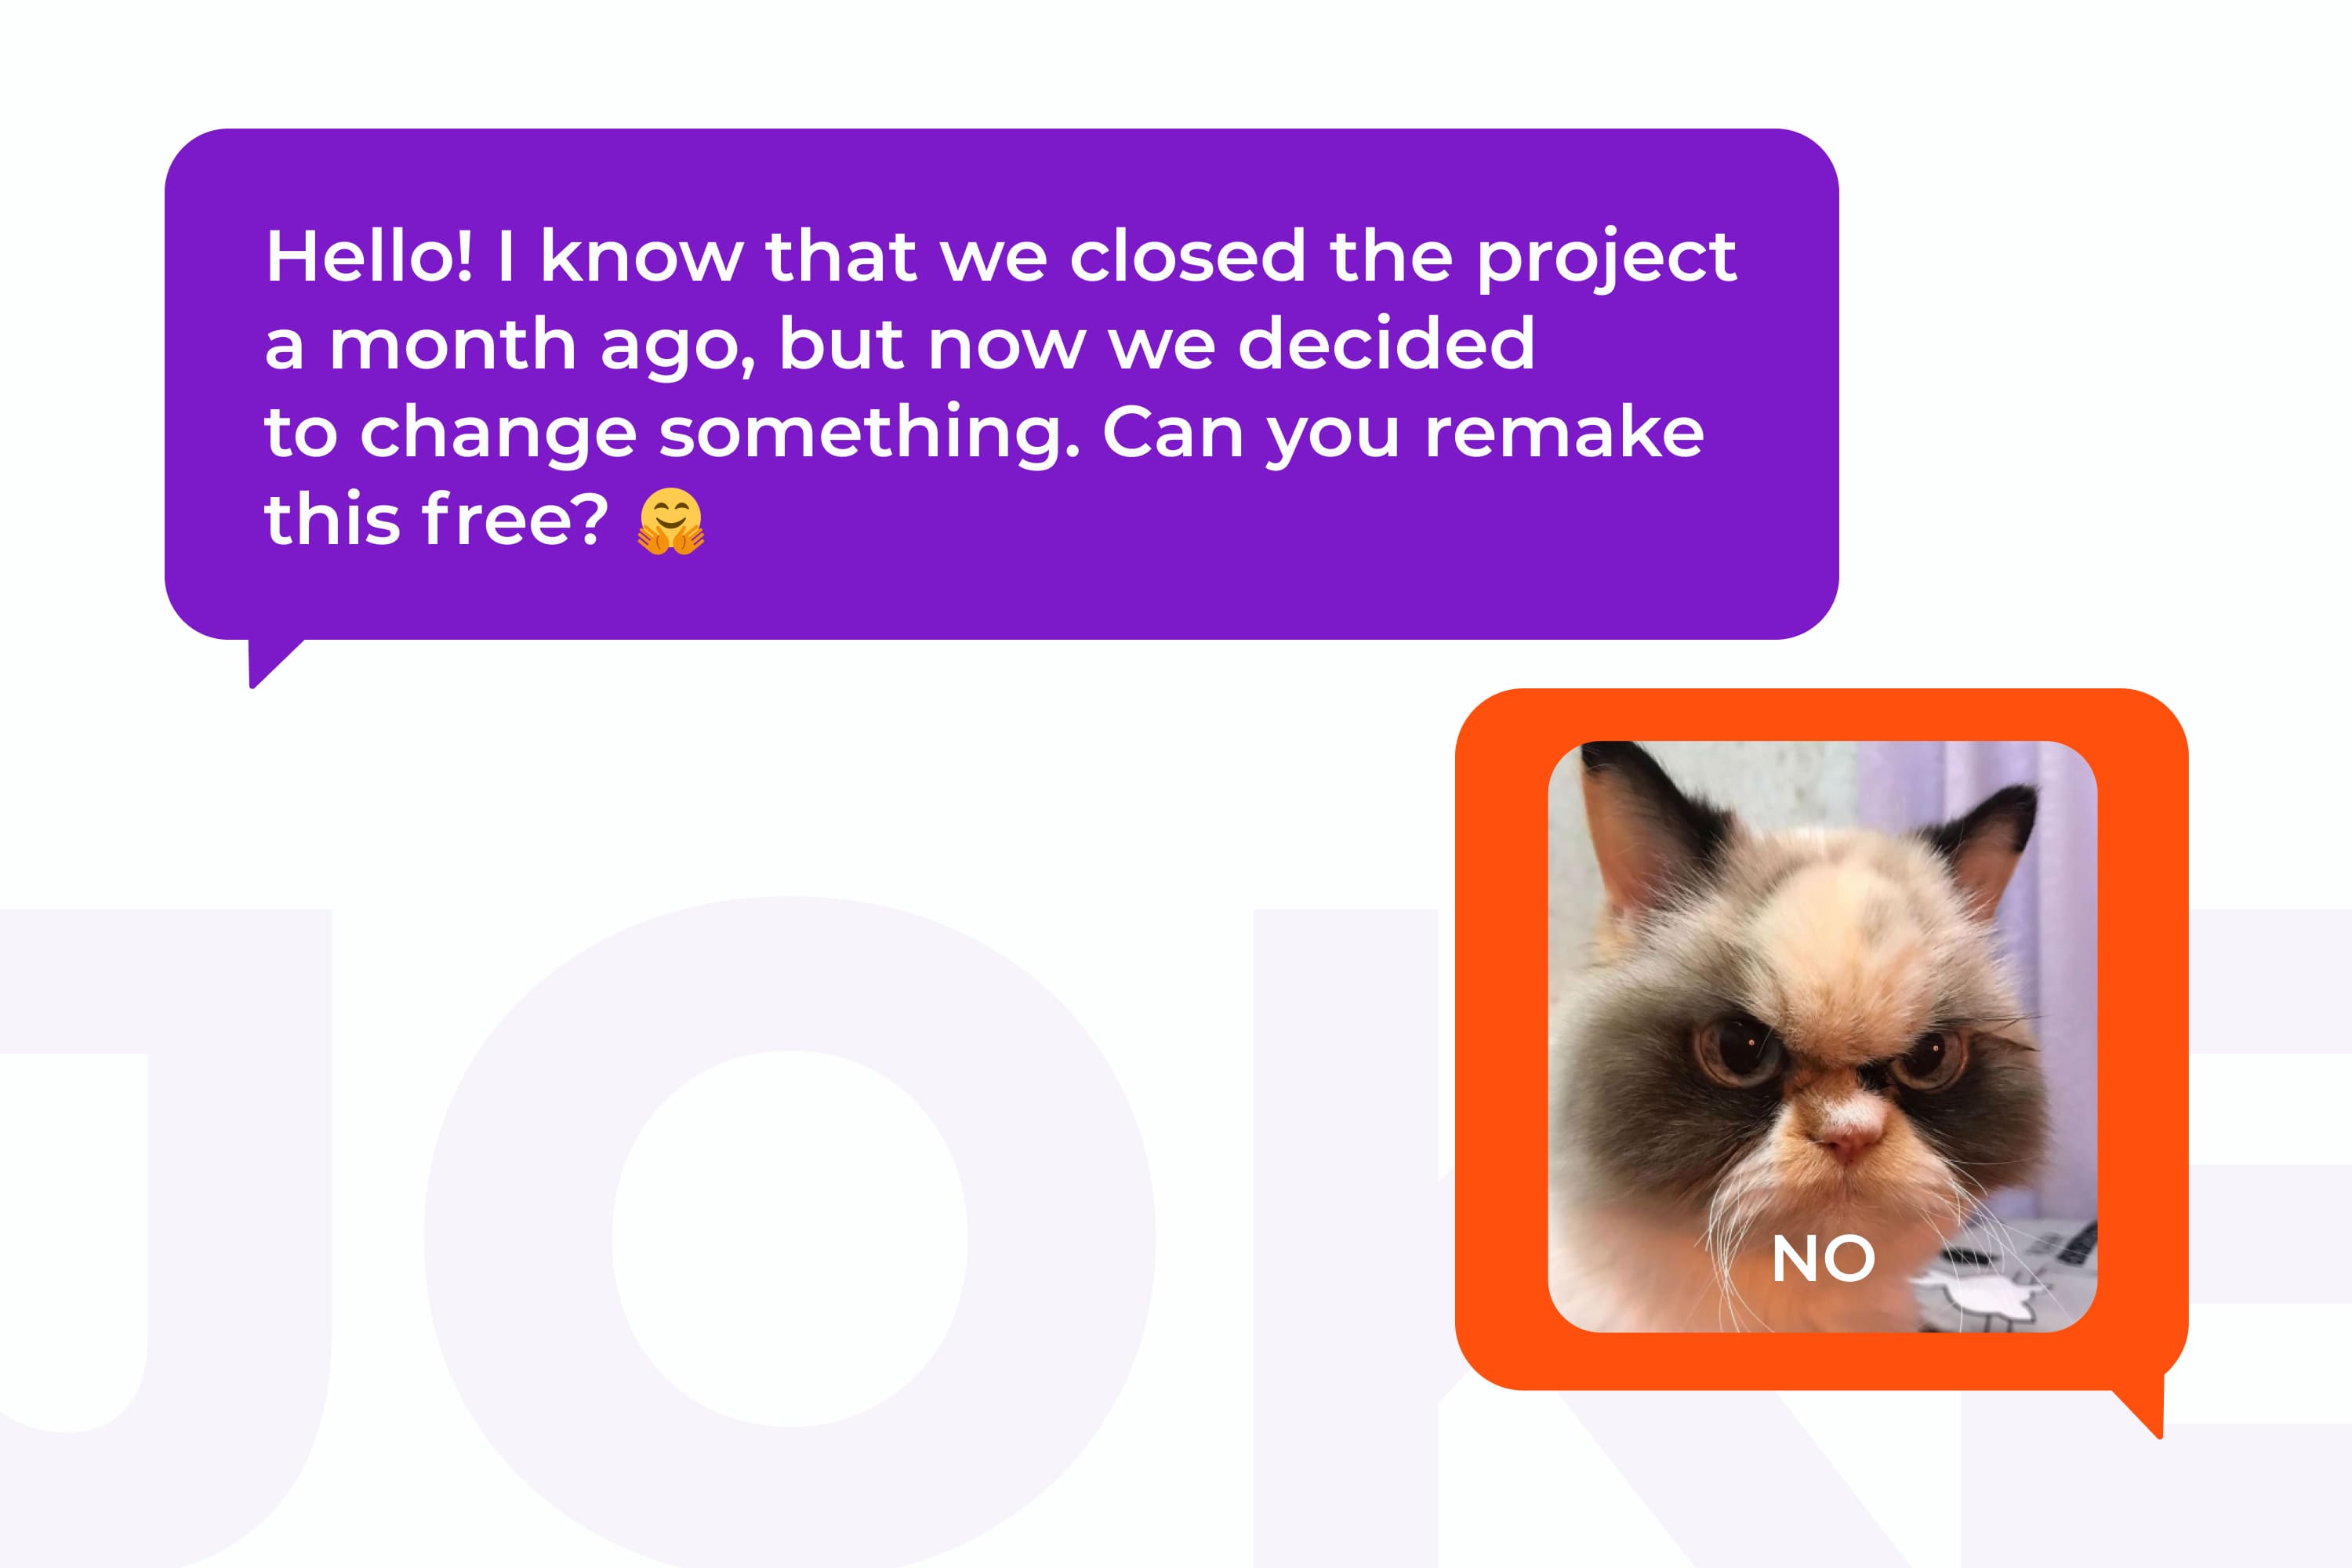 Comic book with a question on a purple background and an answer with a photo of an angry cat on an orange background.